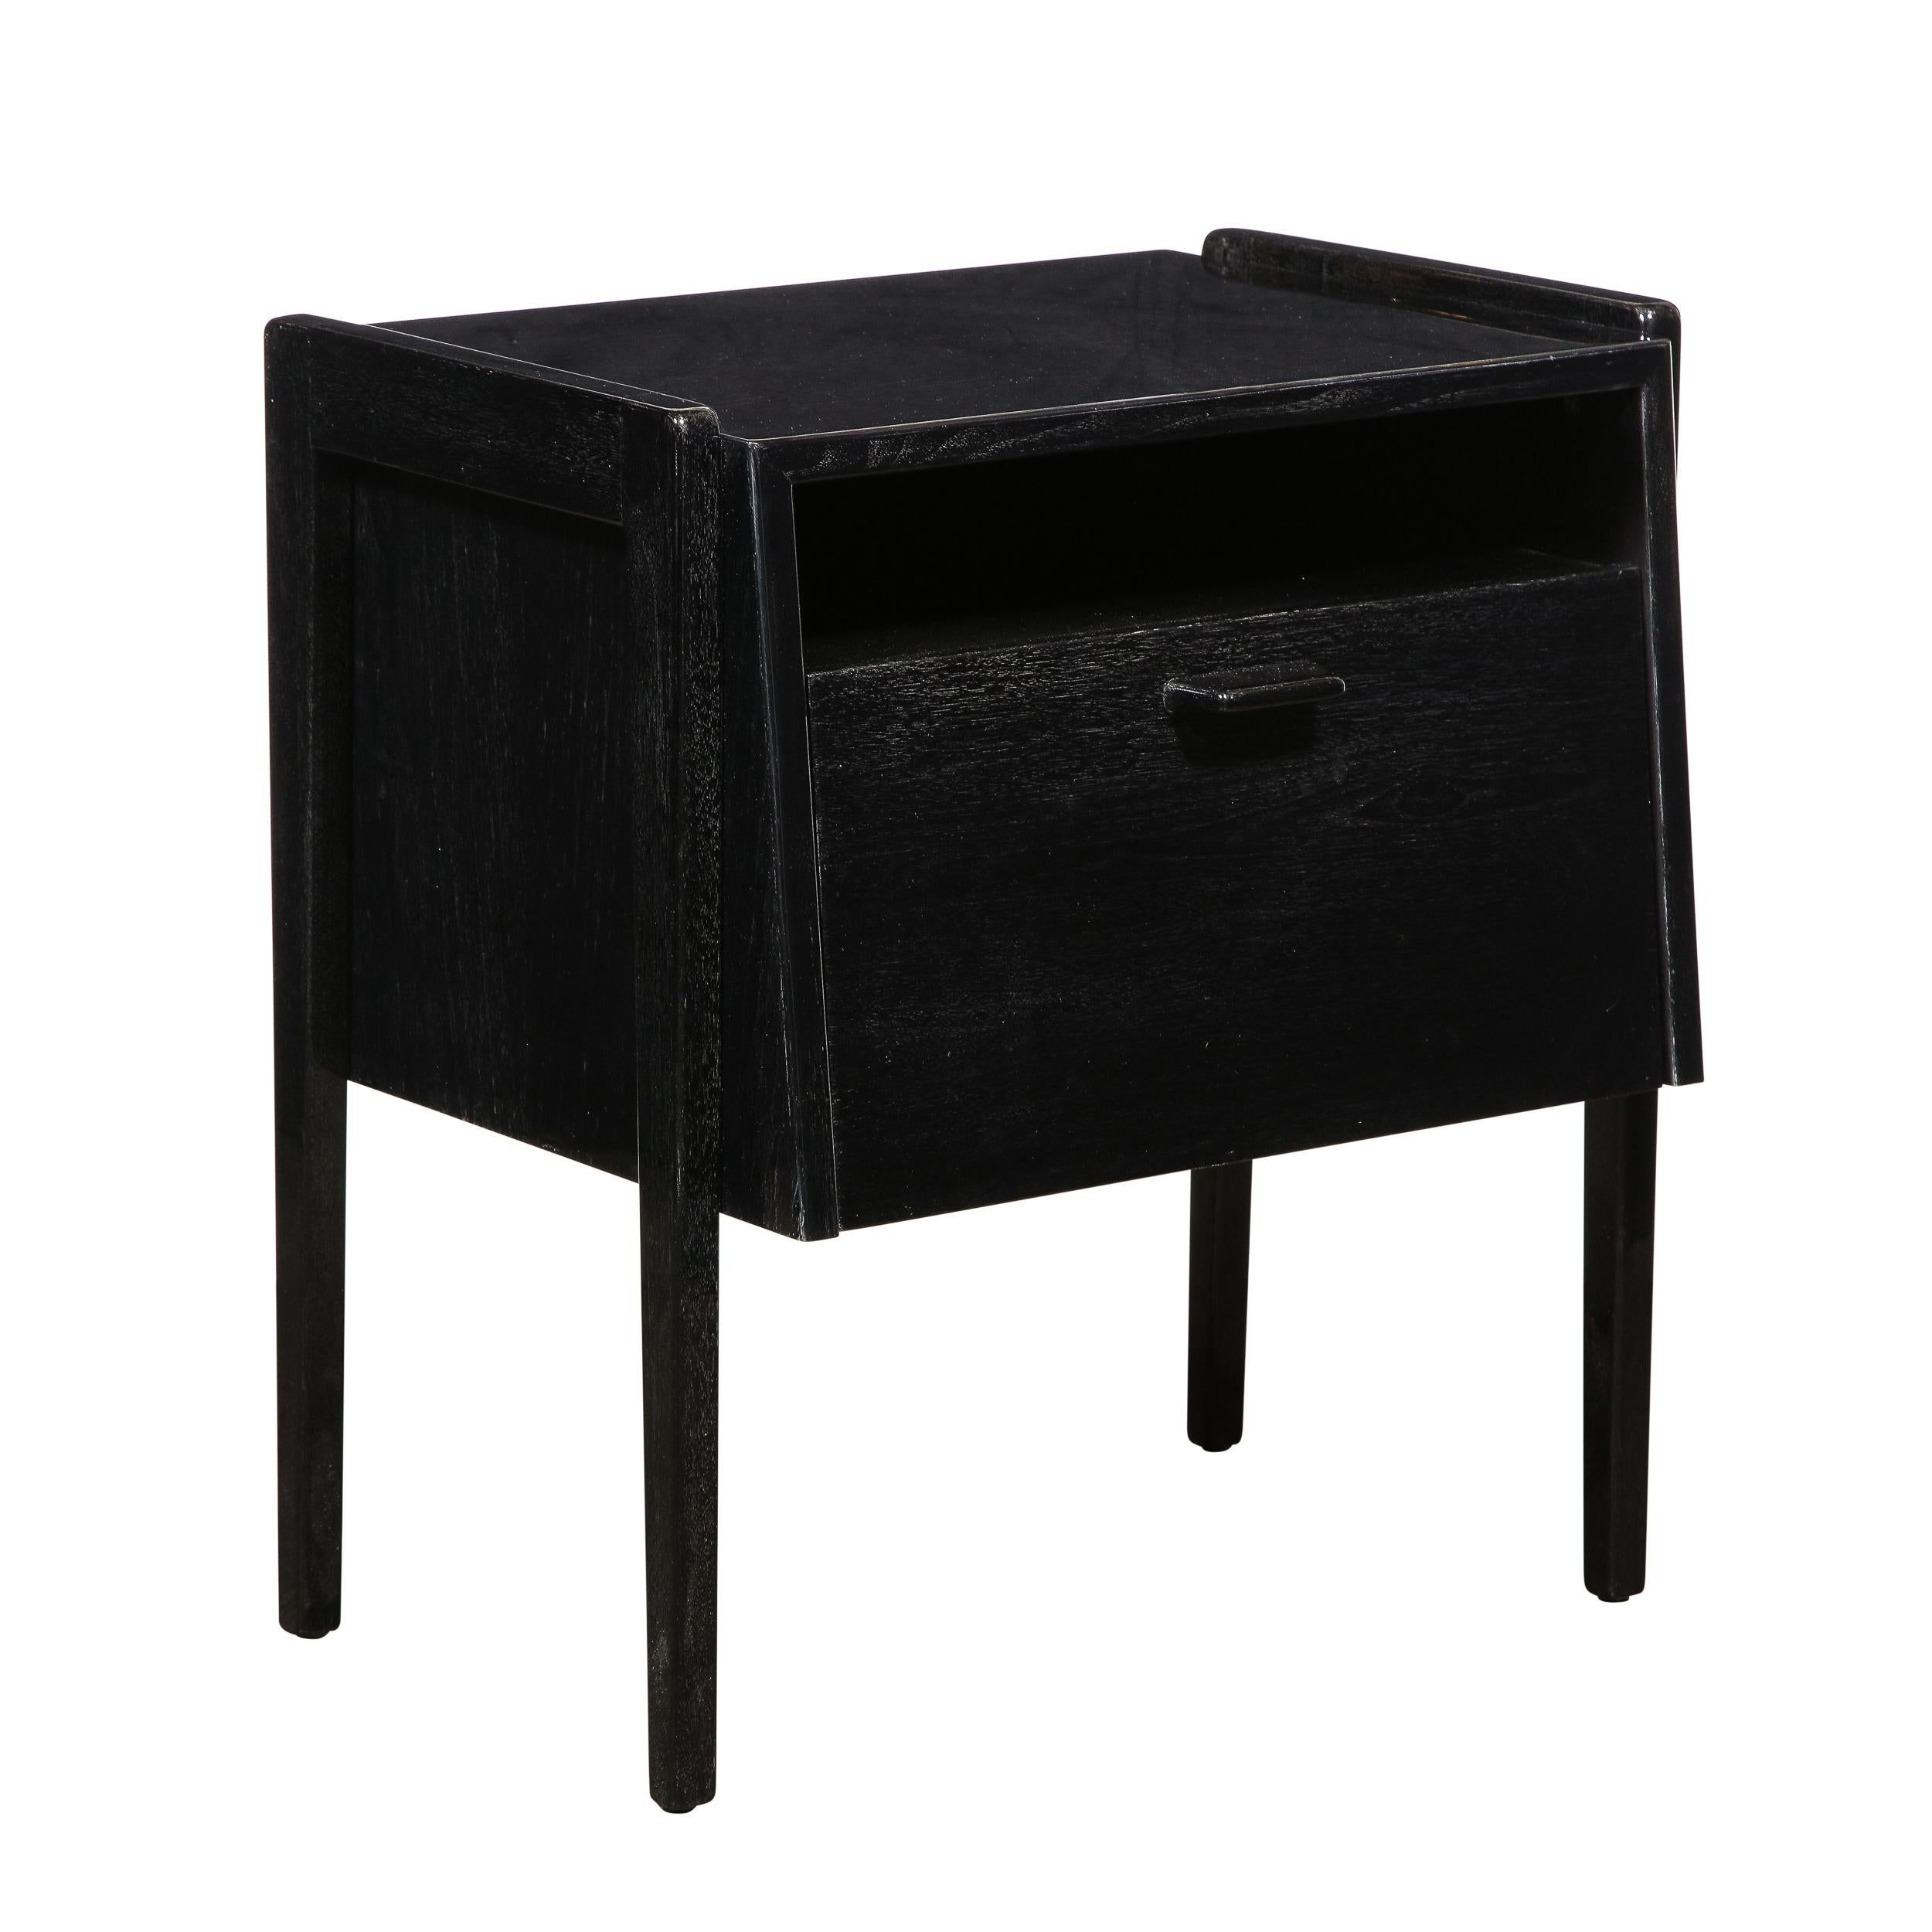 This elegant pair of Mid-Century Modern sculptural nightstands was realized in the United States, circa 1950. They feature volumetric rectangular bodies whose fronts extend on a bias outwards at the base with tapered legs attached to the sides,